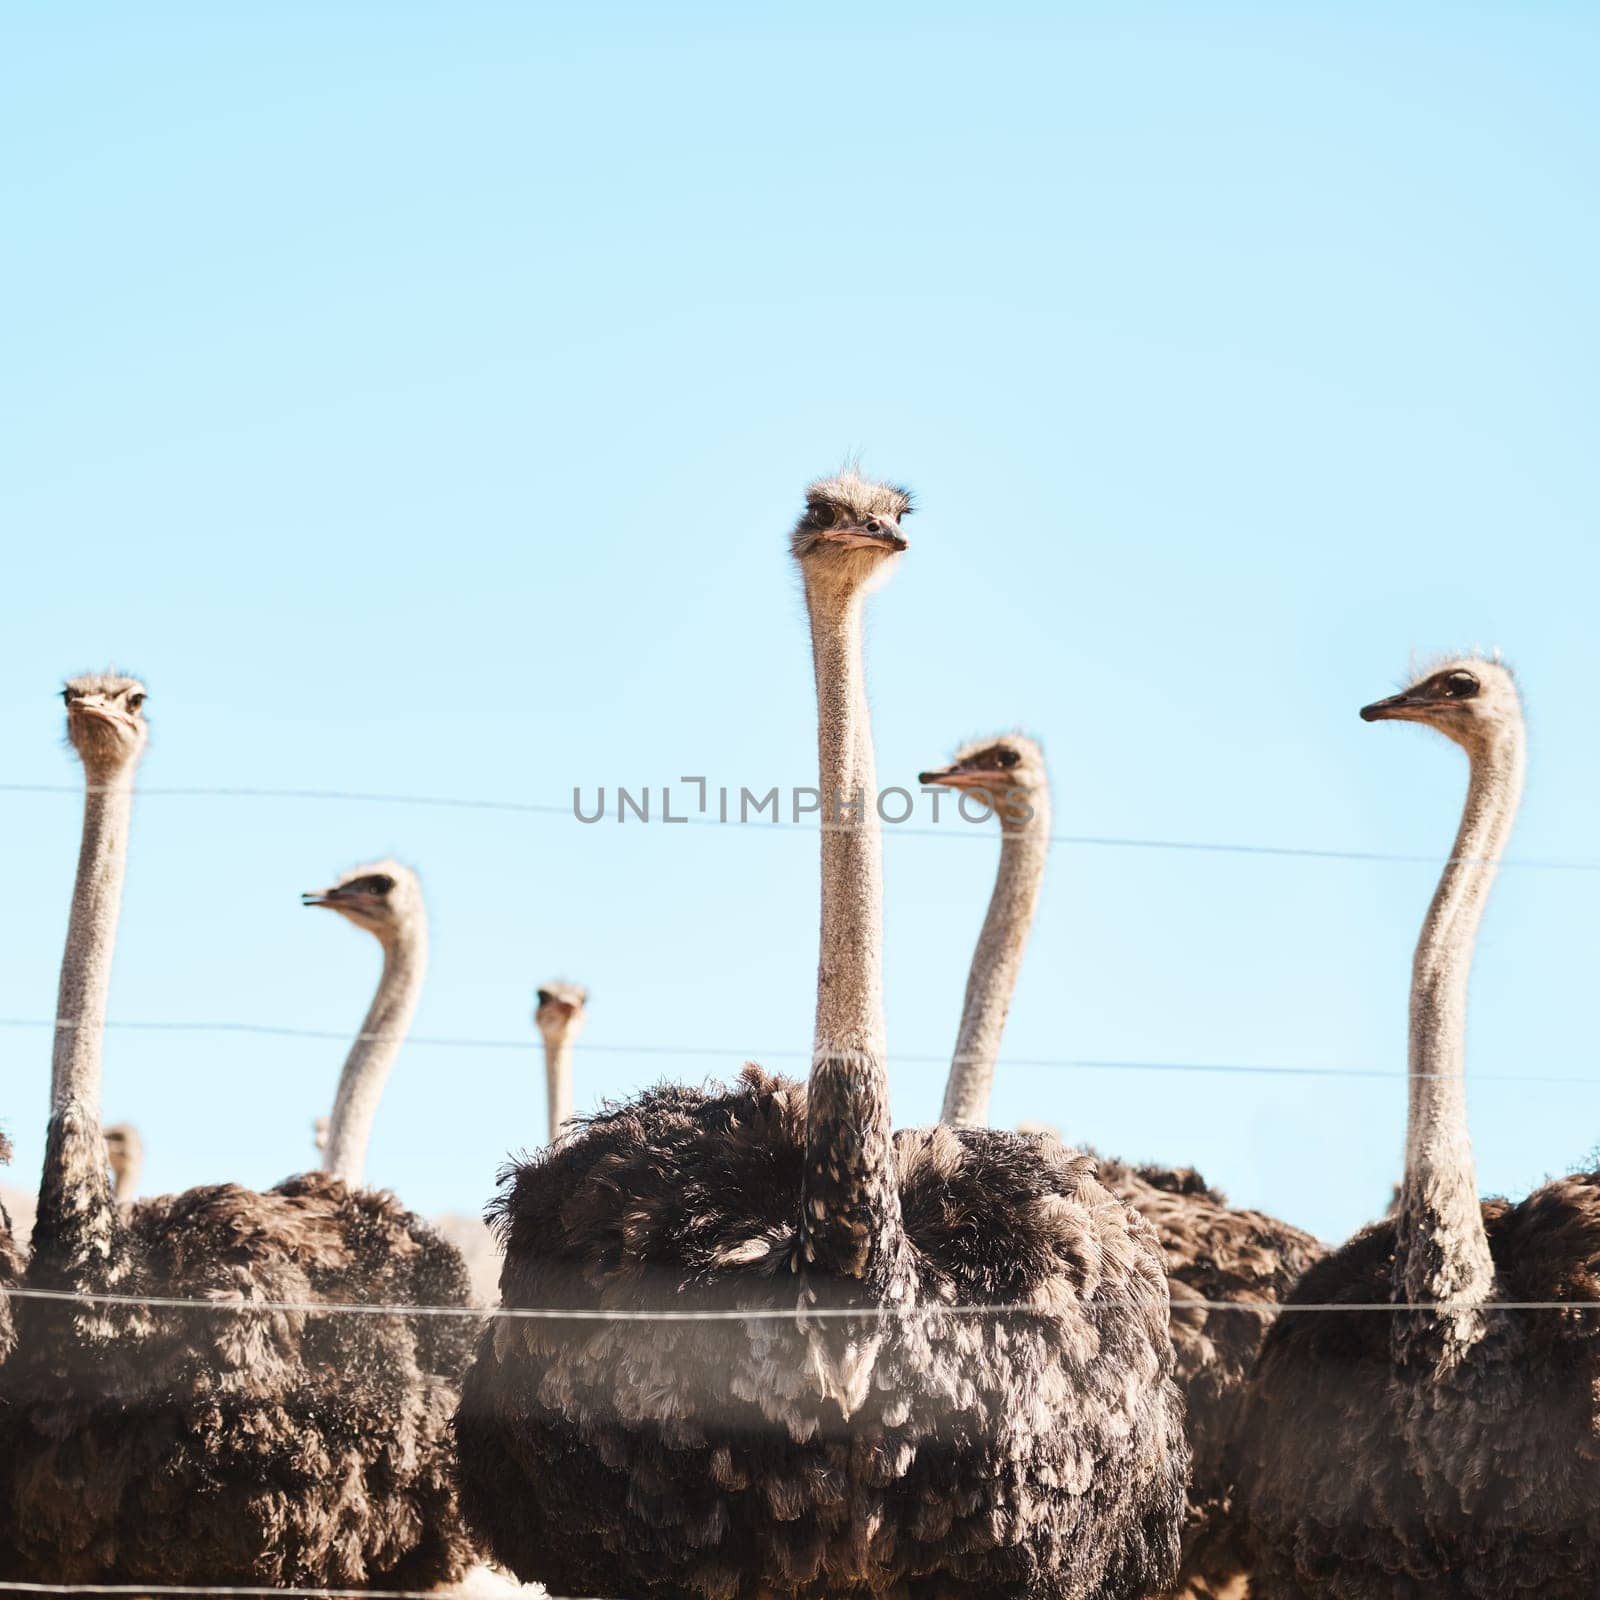 Our long necks make it all the better to see you. Still life shot of a flock of ostriches on a farm